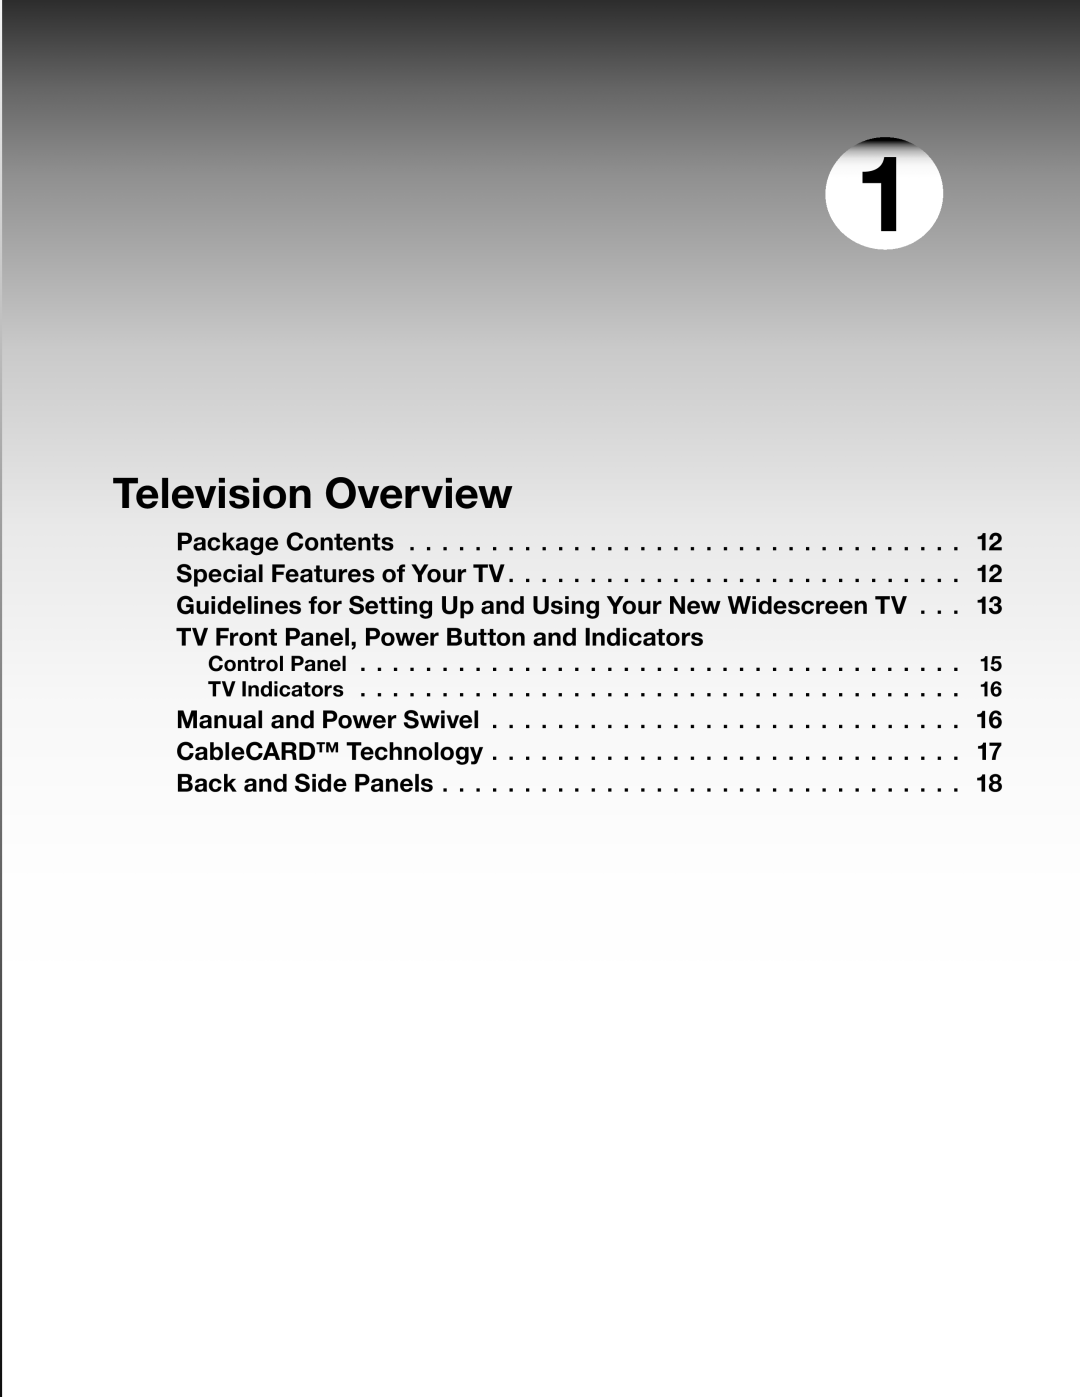 Mitsubishi Electronics LT-37131 manual Television Overview, Guidelines for Setting Up and Using Your New Widescreen TV 